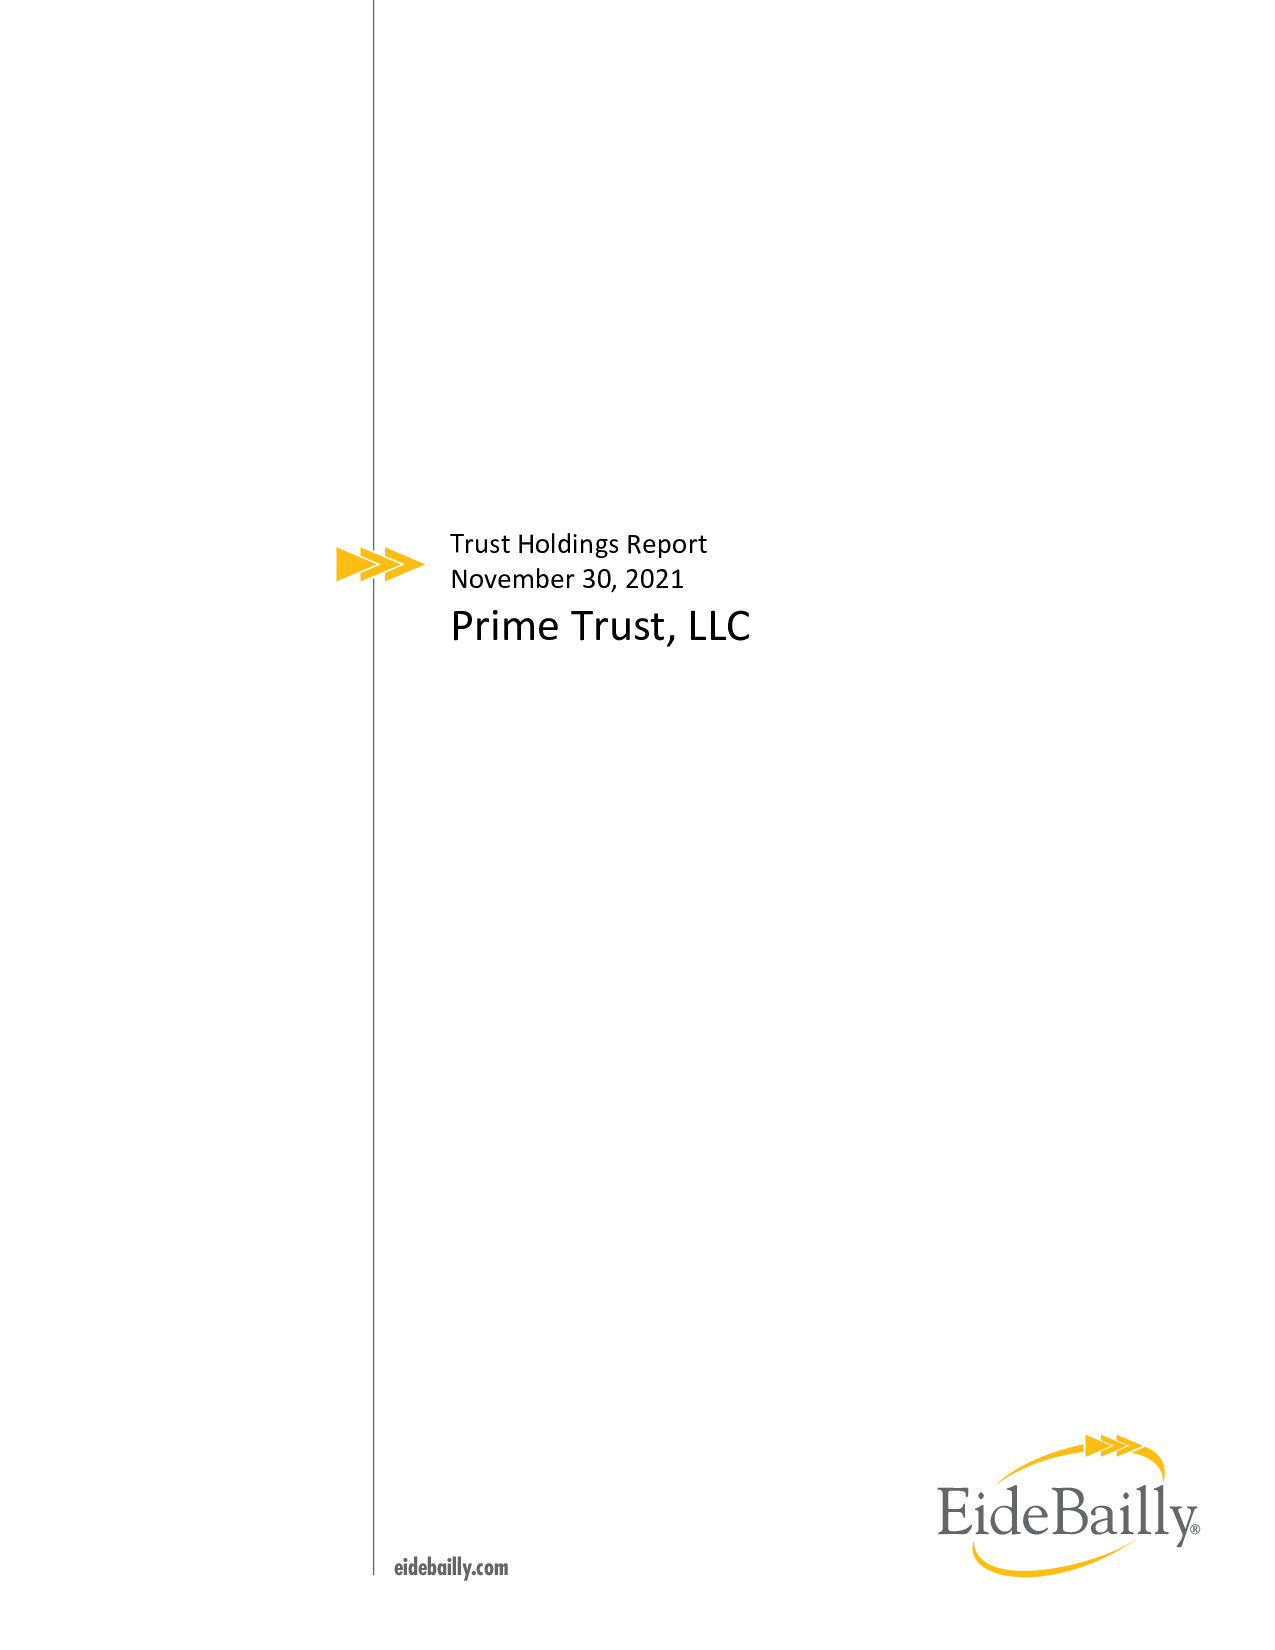 11_30_21_Final_Signed_Report__Prime_Trust__LLC_AE_2021__001.png